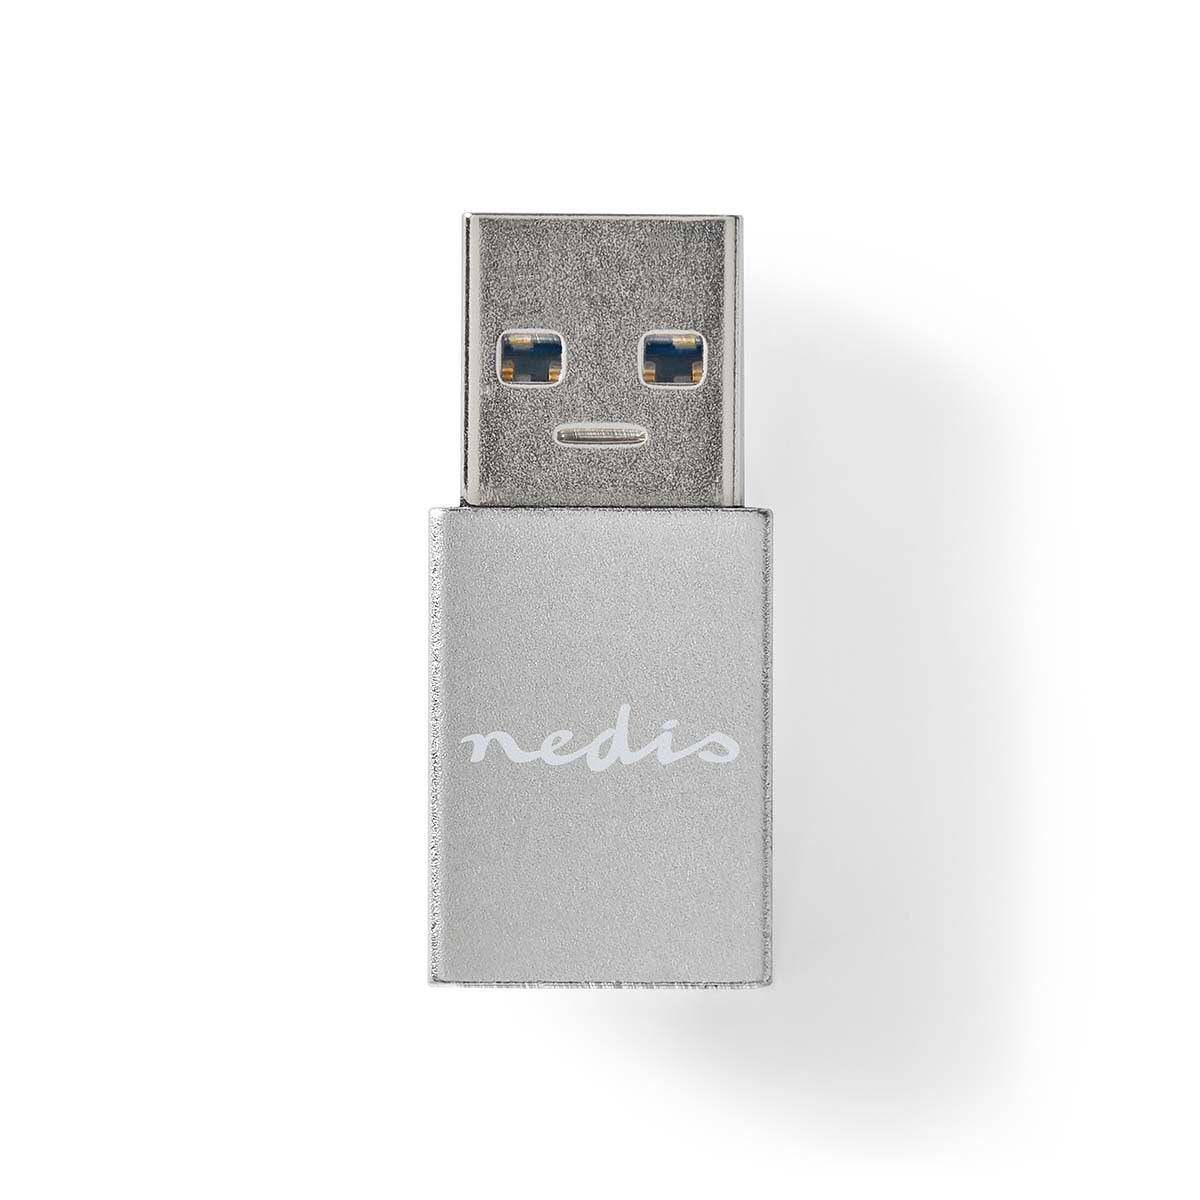 Nedis USB Type-C to USB 3.2 Type-A adapter, transmission speed up to 5 Gbit/s, nickel-plated connector, metal body